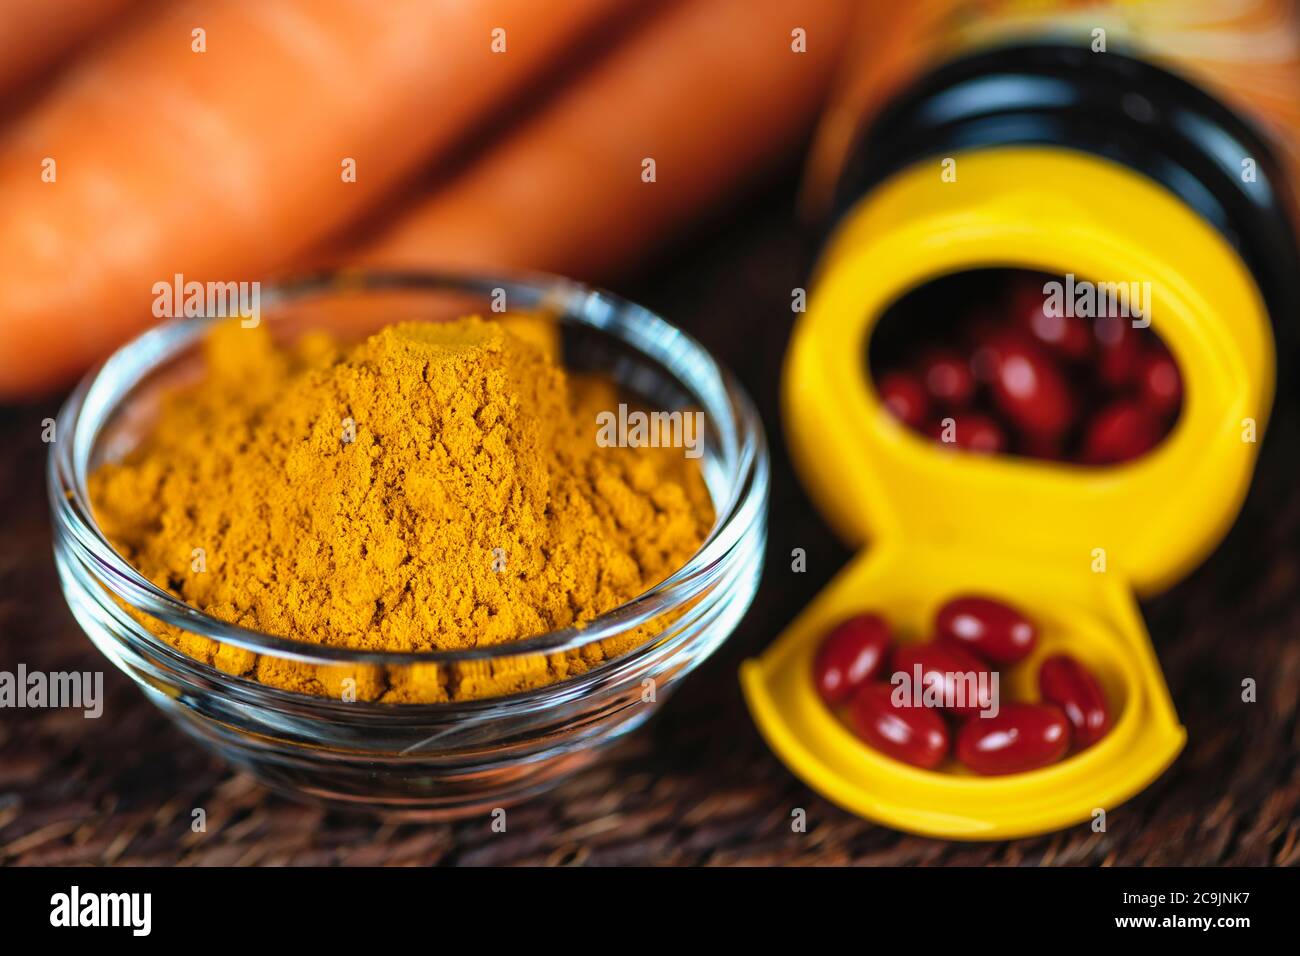 Beta carotene supplements pills and natural sources of beta carotene in fresh vegetables. Antioxidant supplements and natural sources of beta carotene Stock Photo